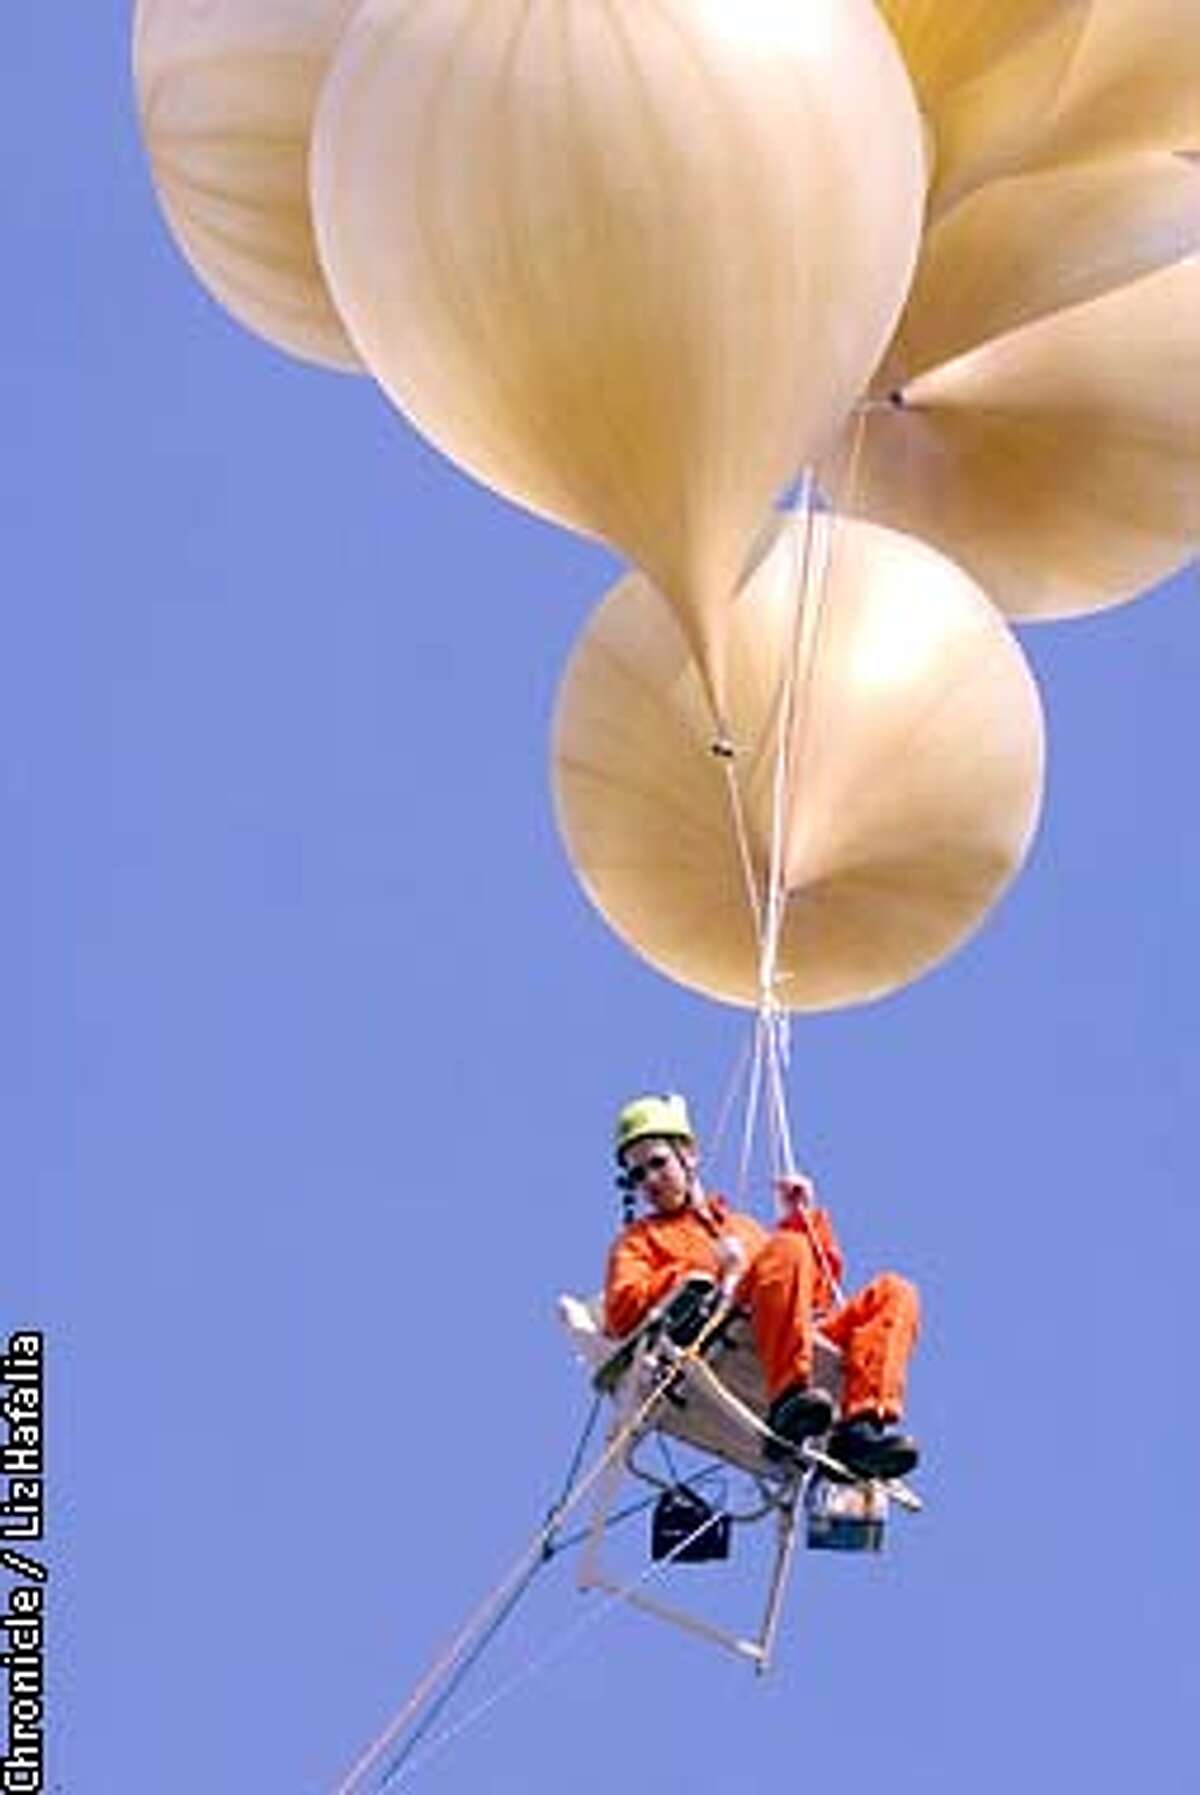 As a stunt marking the 20th anniversary of Larry Graham's lawn-chair balloon flight in L.A., a TV documentary crew tethered Adam Savage to a lawn chair with helium balloons. (PHOTOGRAPHED BY LIZ HAFALIA/THE SAN FRANCISCO CHRONICLE)